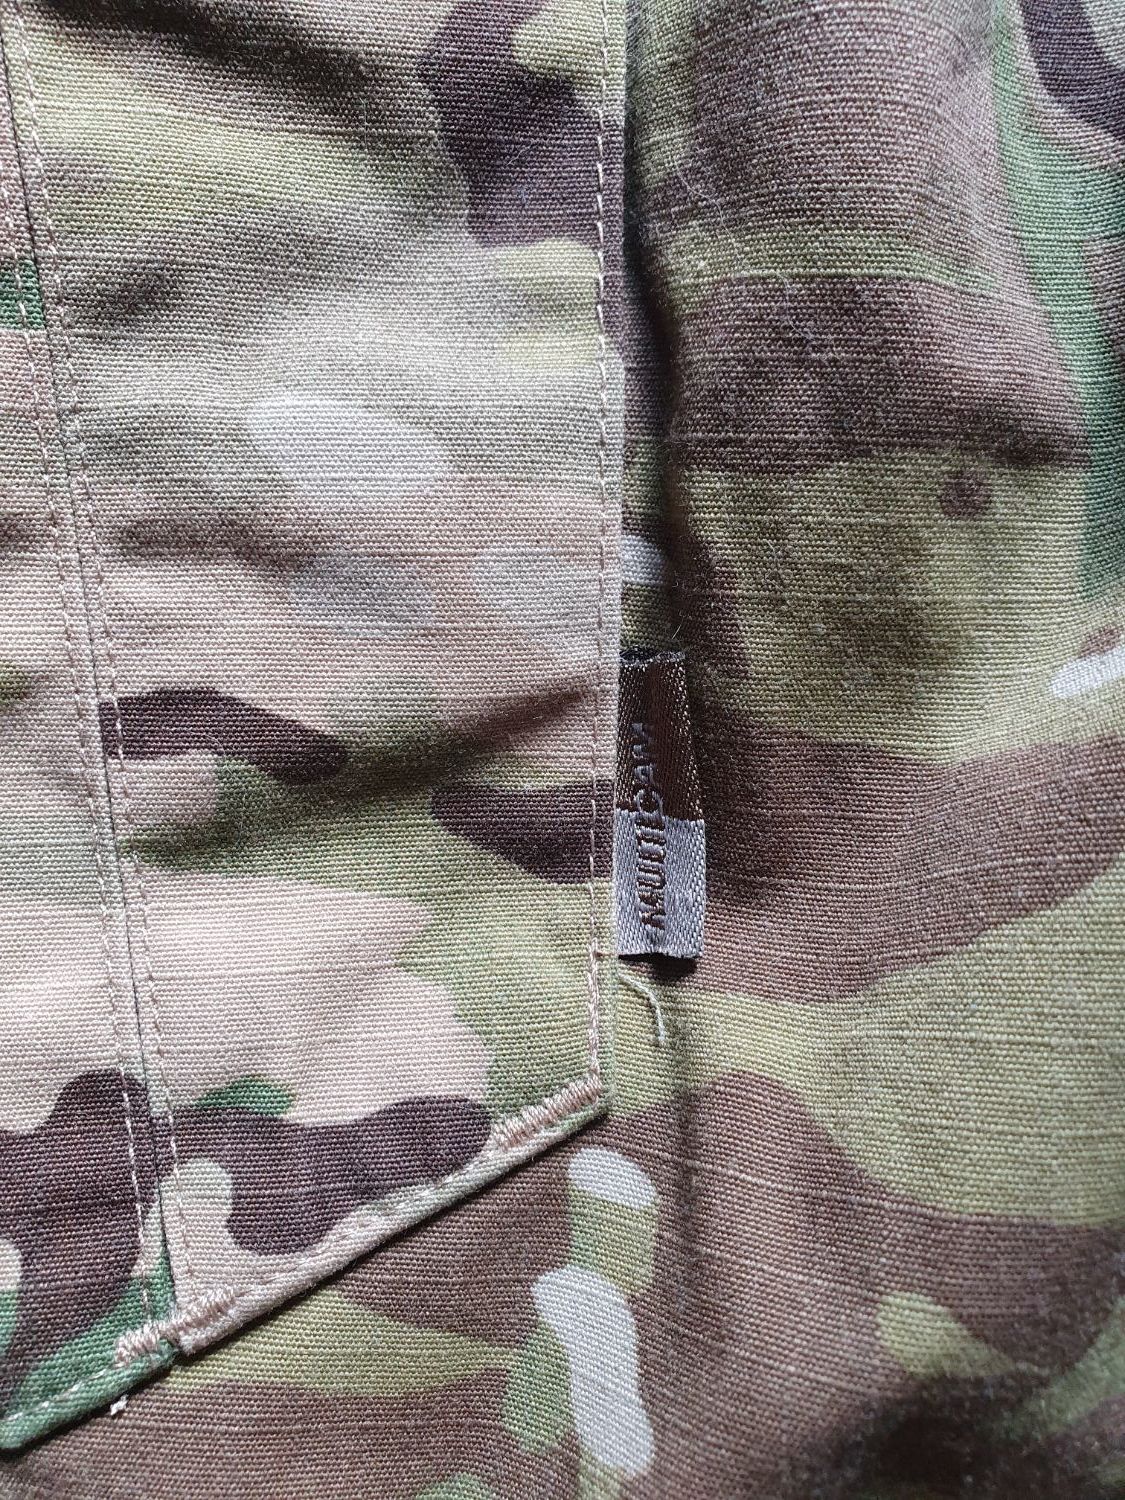 Crye Precision AC UKSF Multicam Combat Pants 36R - Gear - Airsoft Forums UK